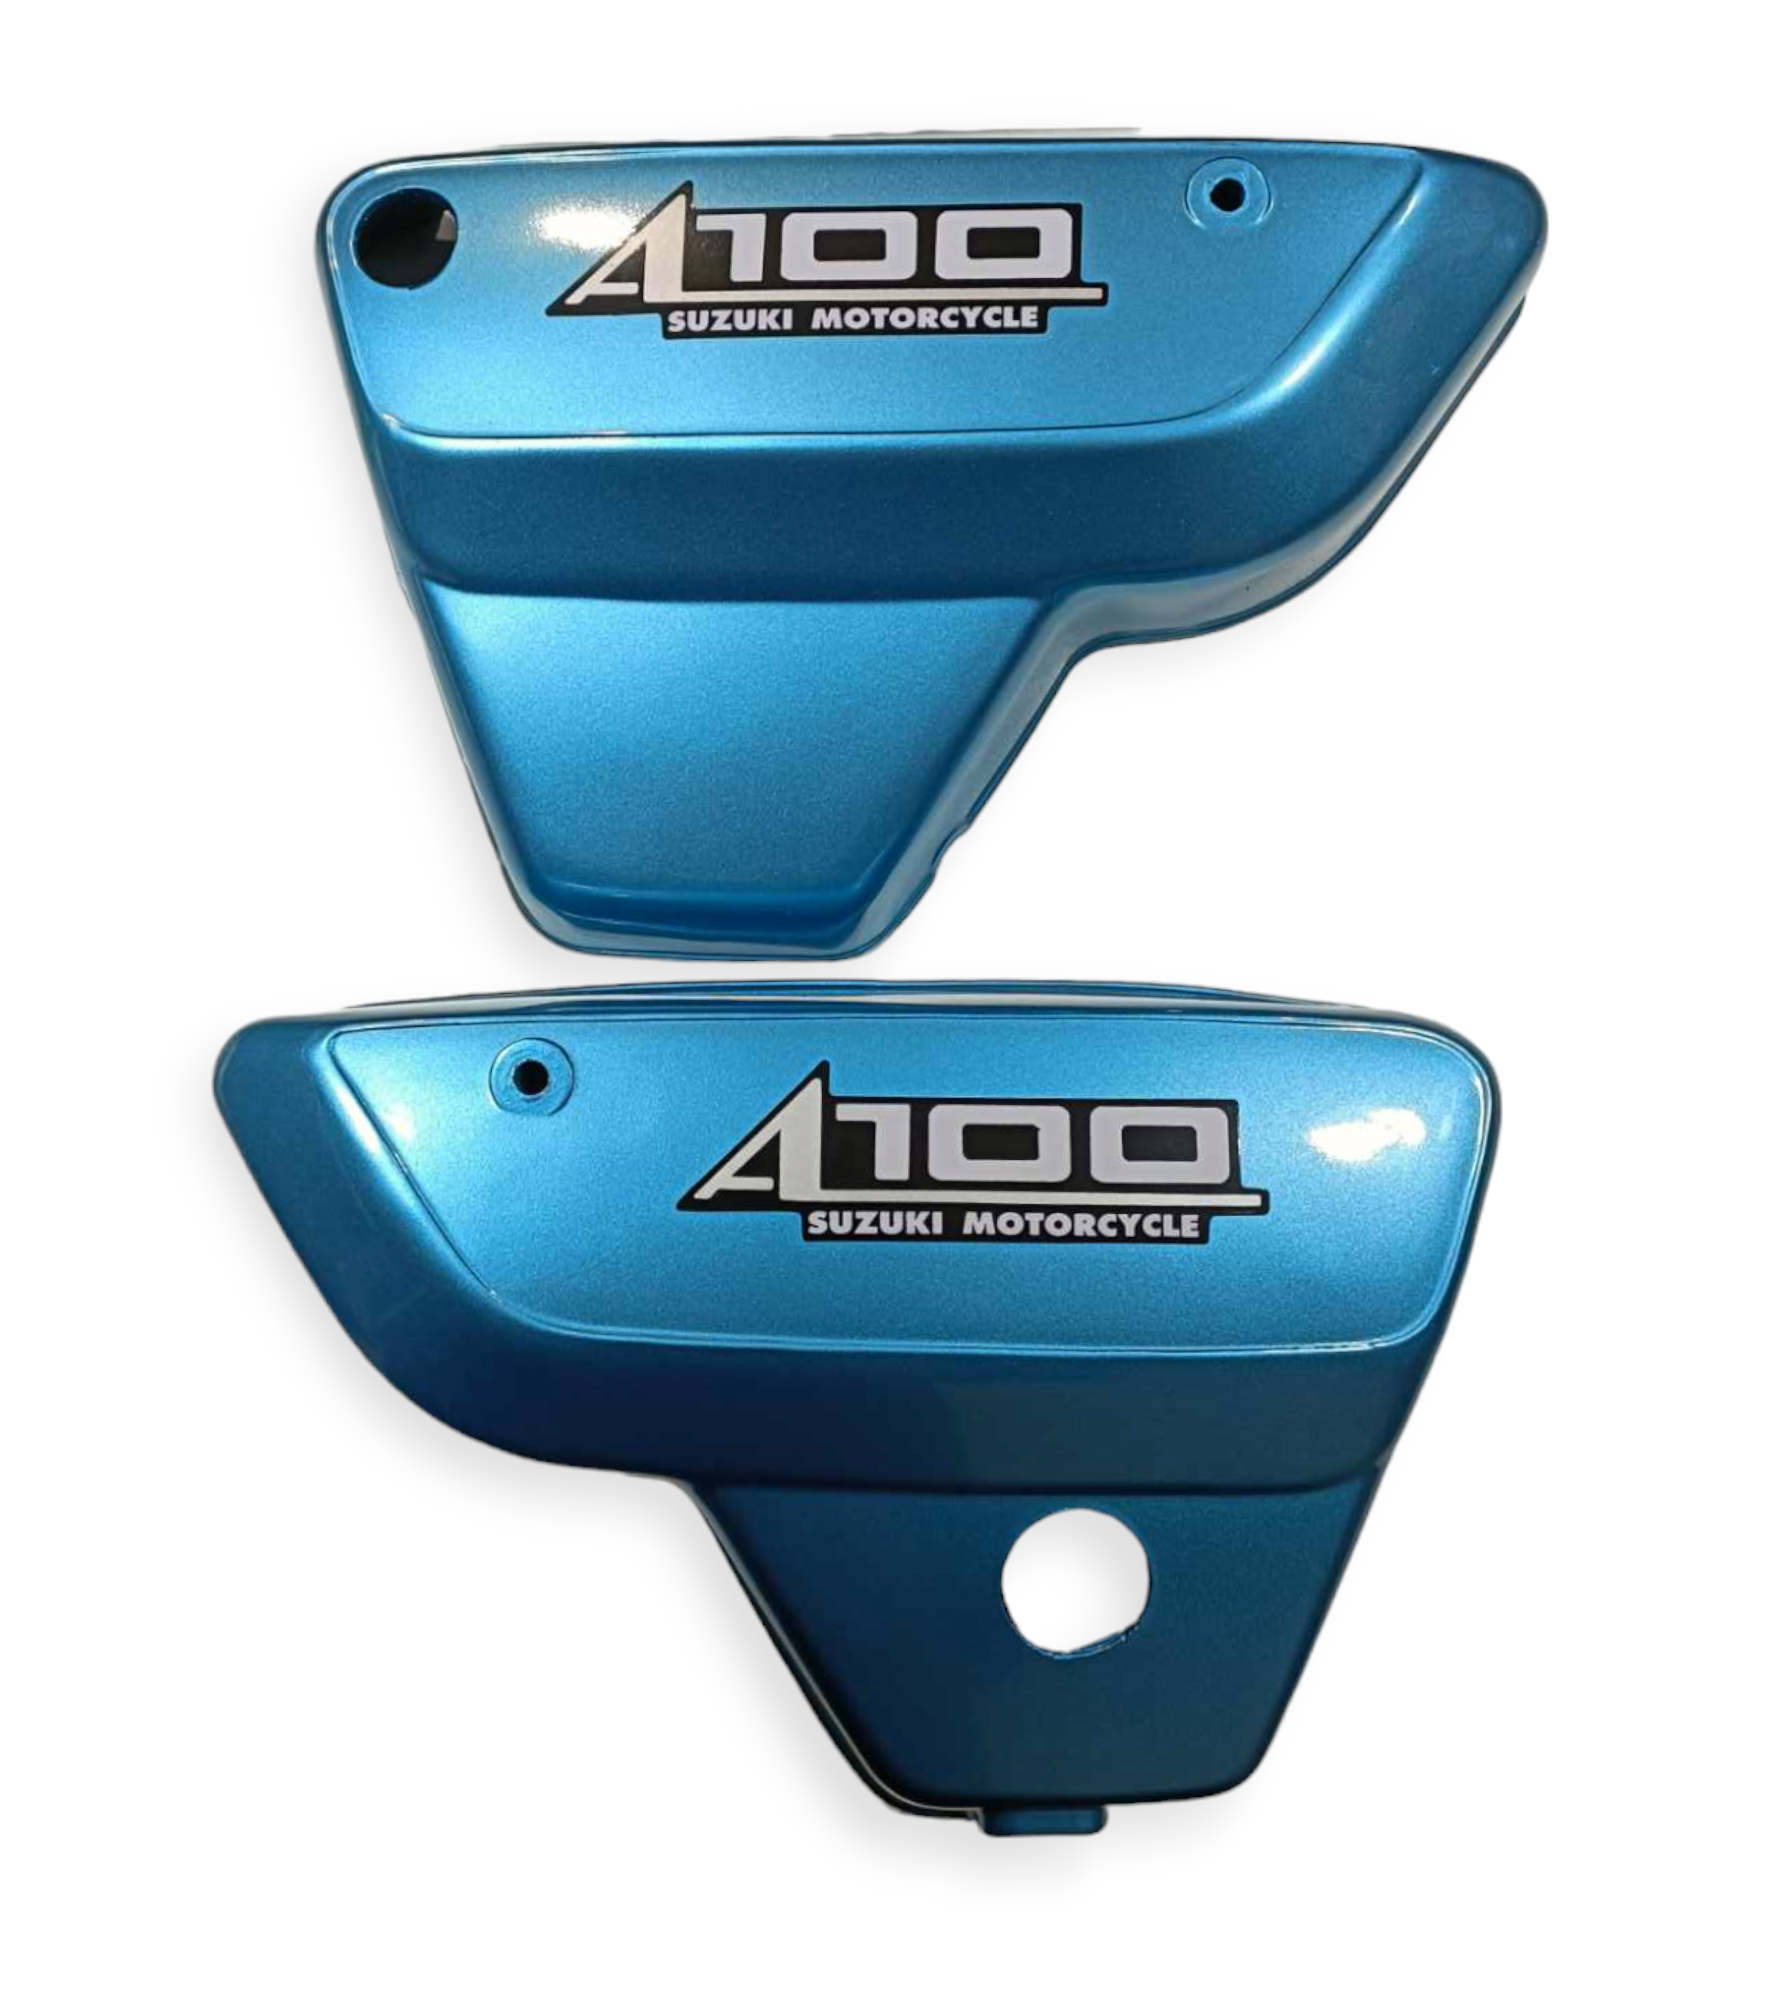 Suzuki A100 Pair Of Motorcycle Side Panel Covers In Blue 47111-23320 47211-23320